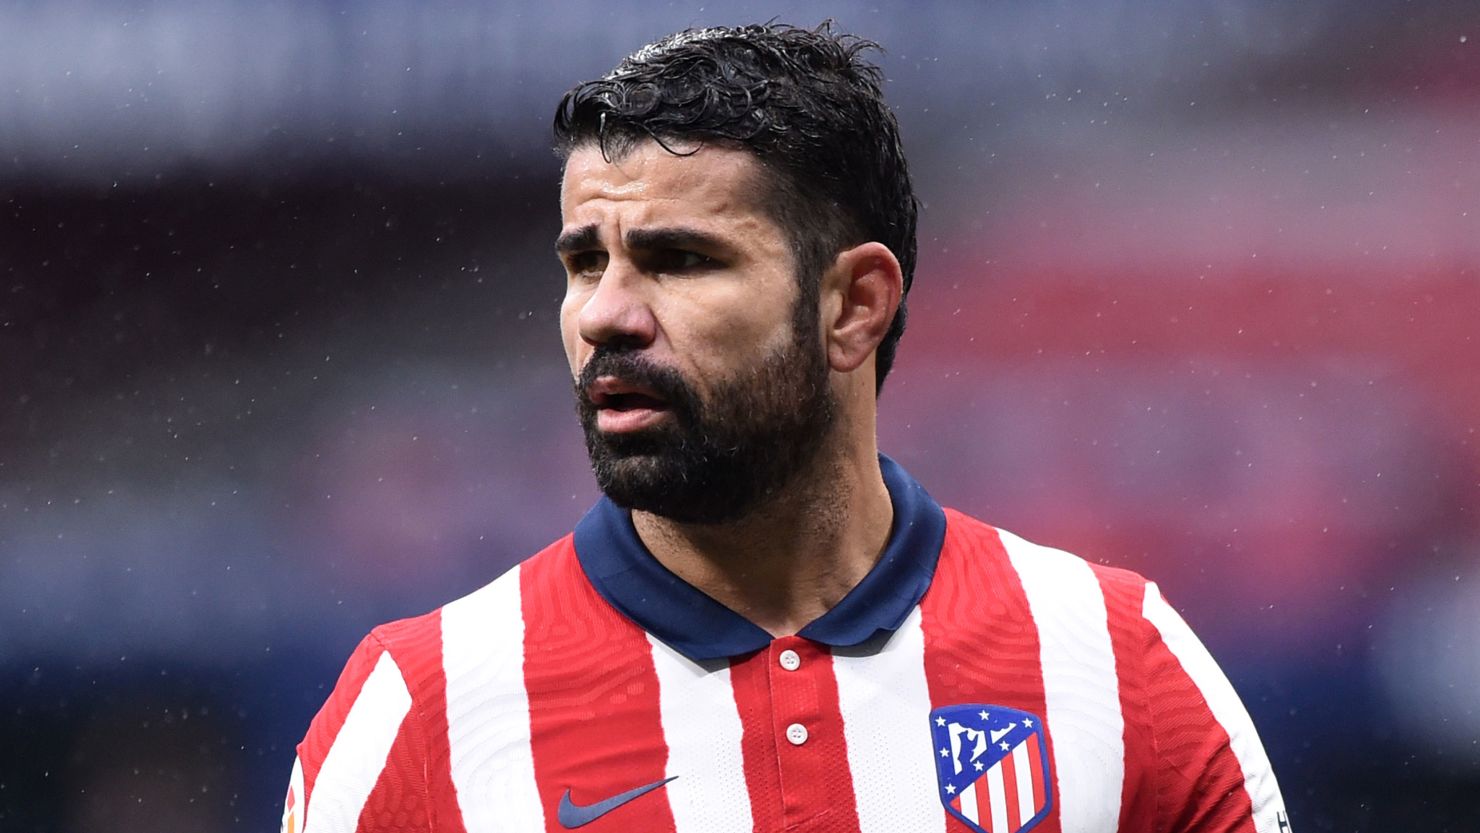 Diego Costa won the La Liga title with Atlético Madrid in 2014.